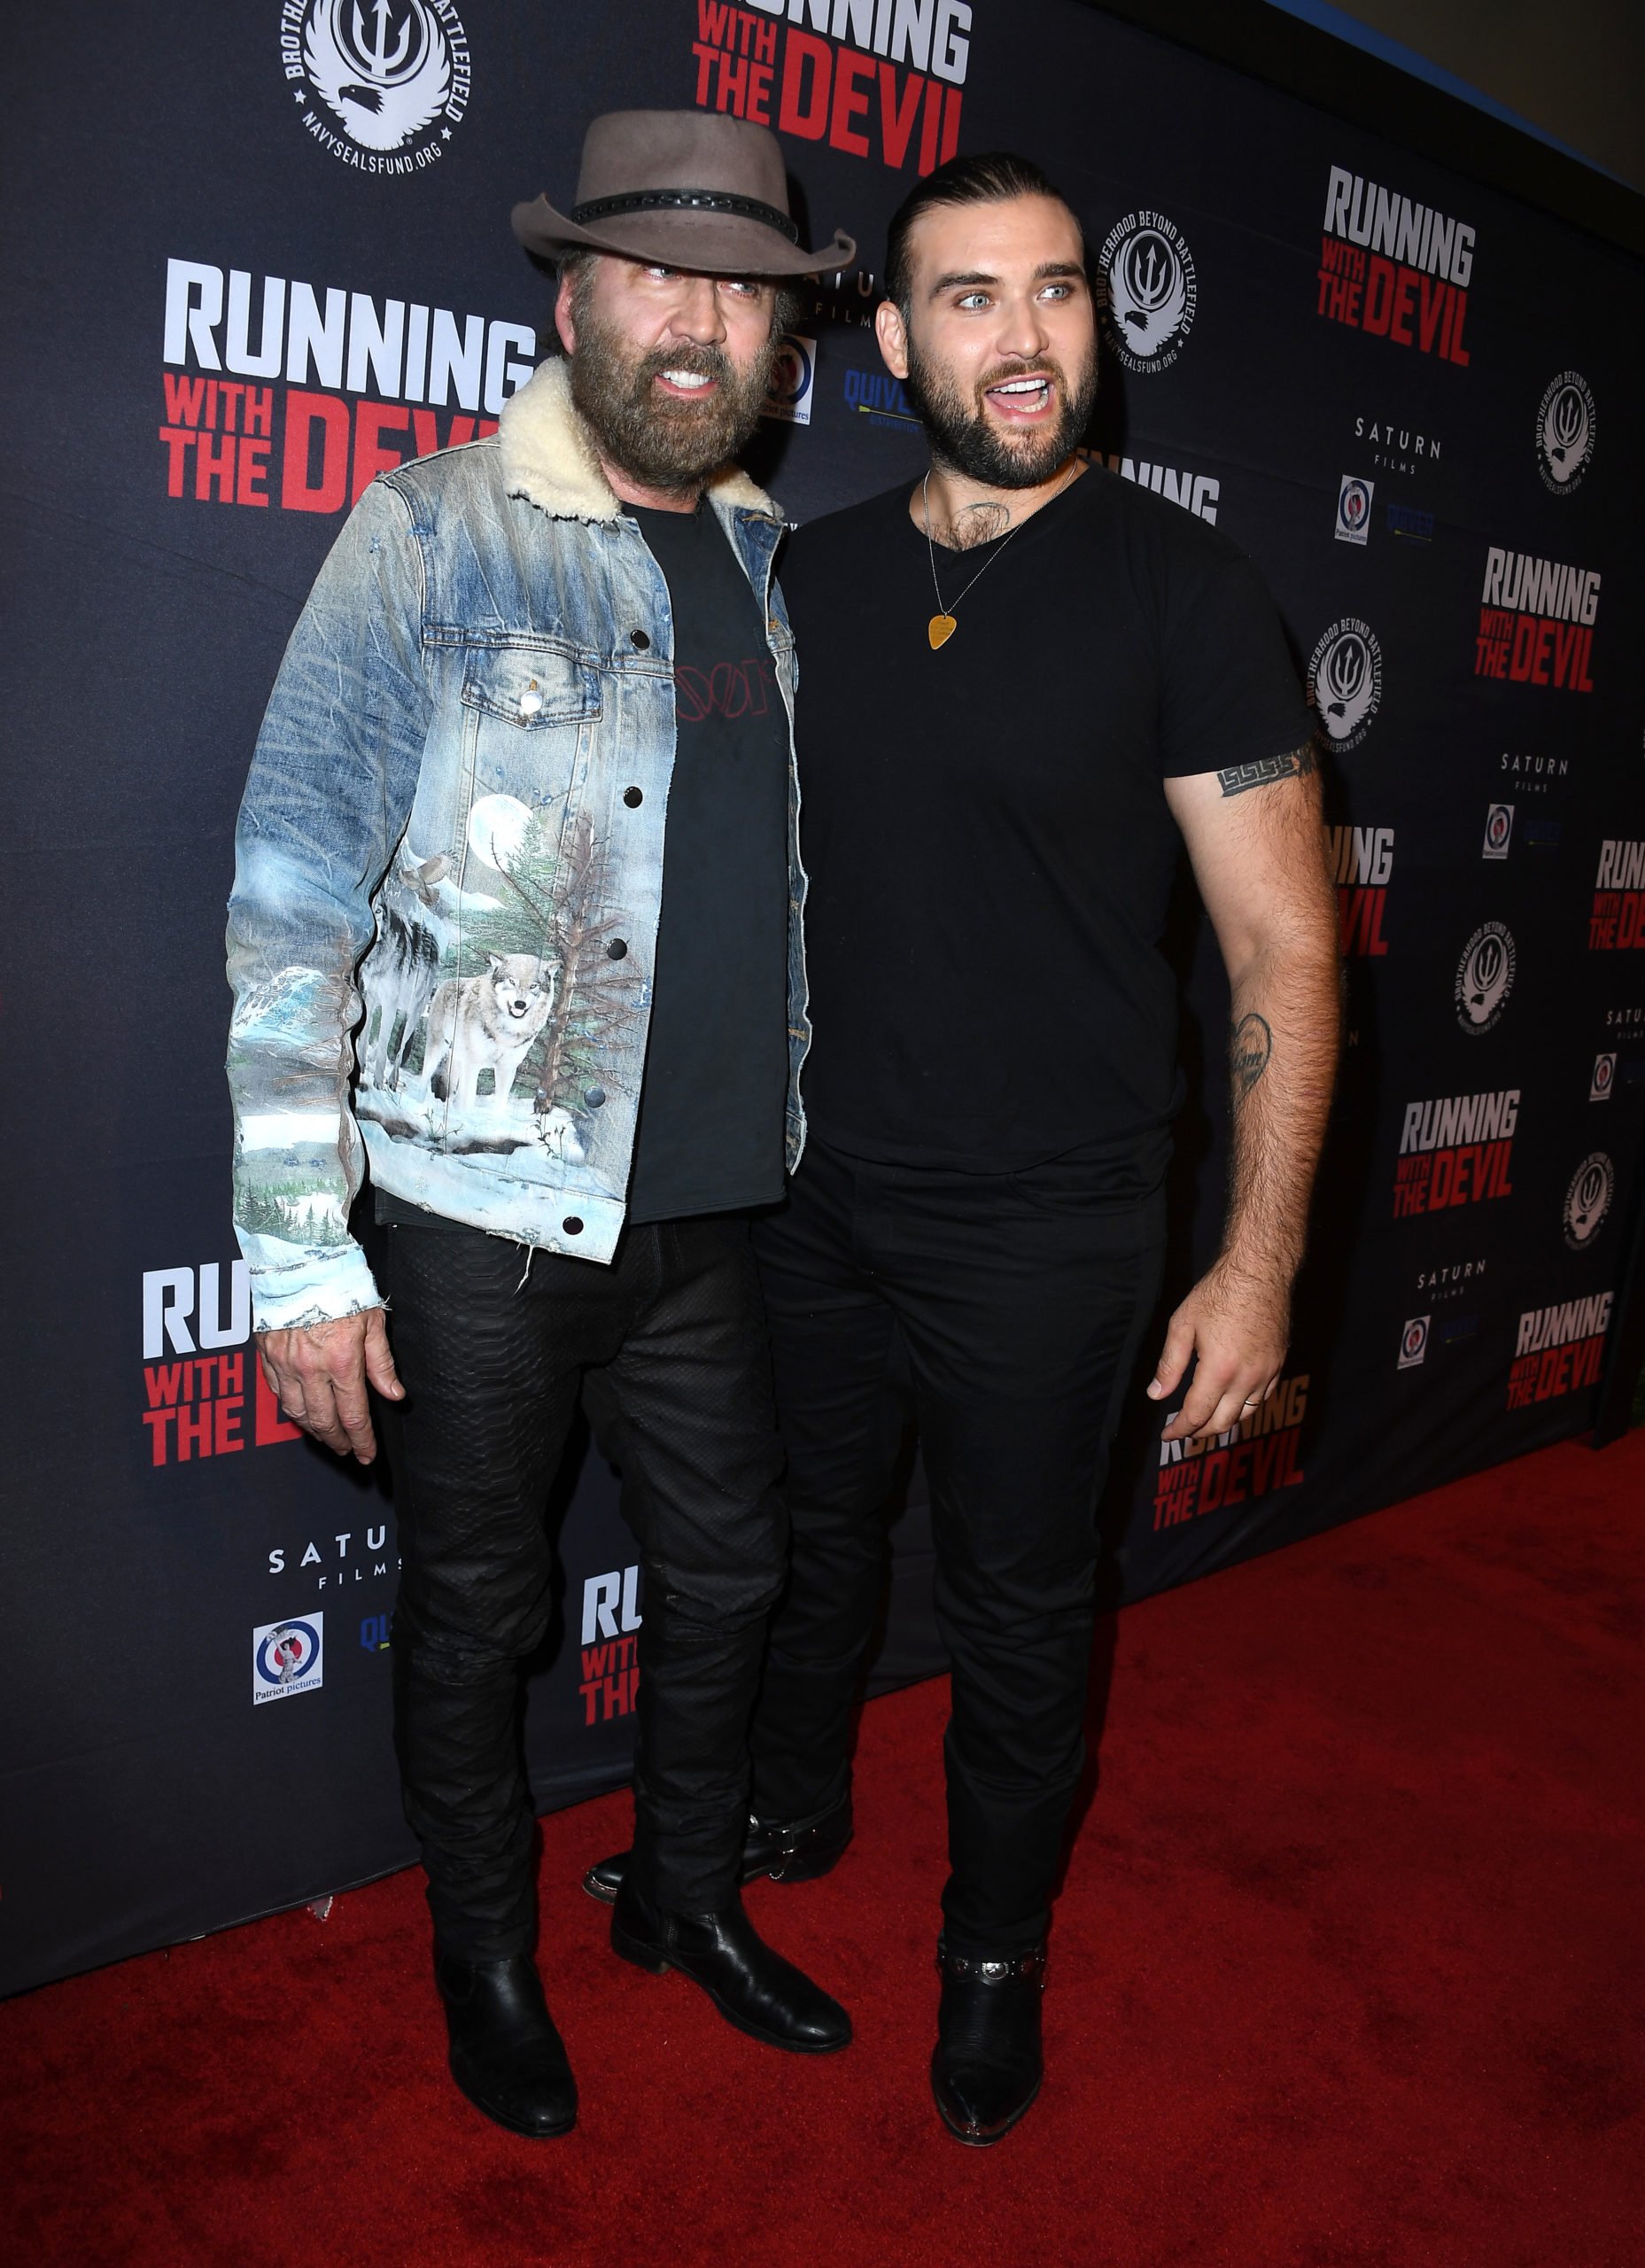 BEVERLY HILLS, CALIFORNIA - SEPTEMBER 16: Nicolas Cage and Weston Coppola Cage arrives at the Premiere Of Quiver Distribution's "Running With The Devil" at Writers Guild Theater on September 16, 2019 in Beverly Hills, California. (Photo by Steve Granitz/WireImage) Getty Images